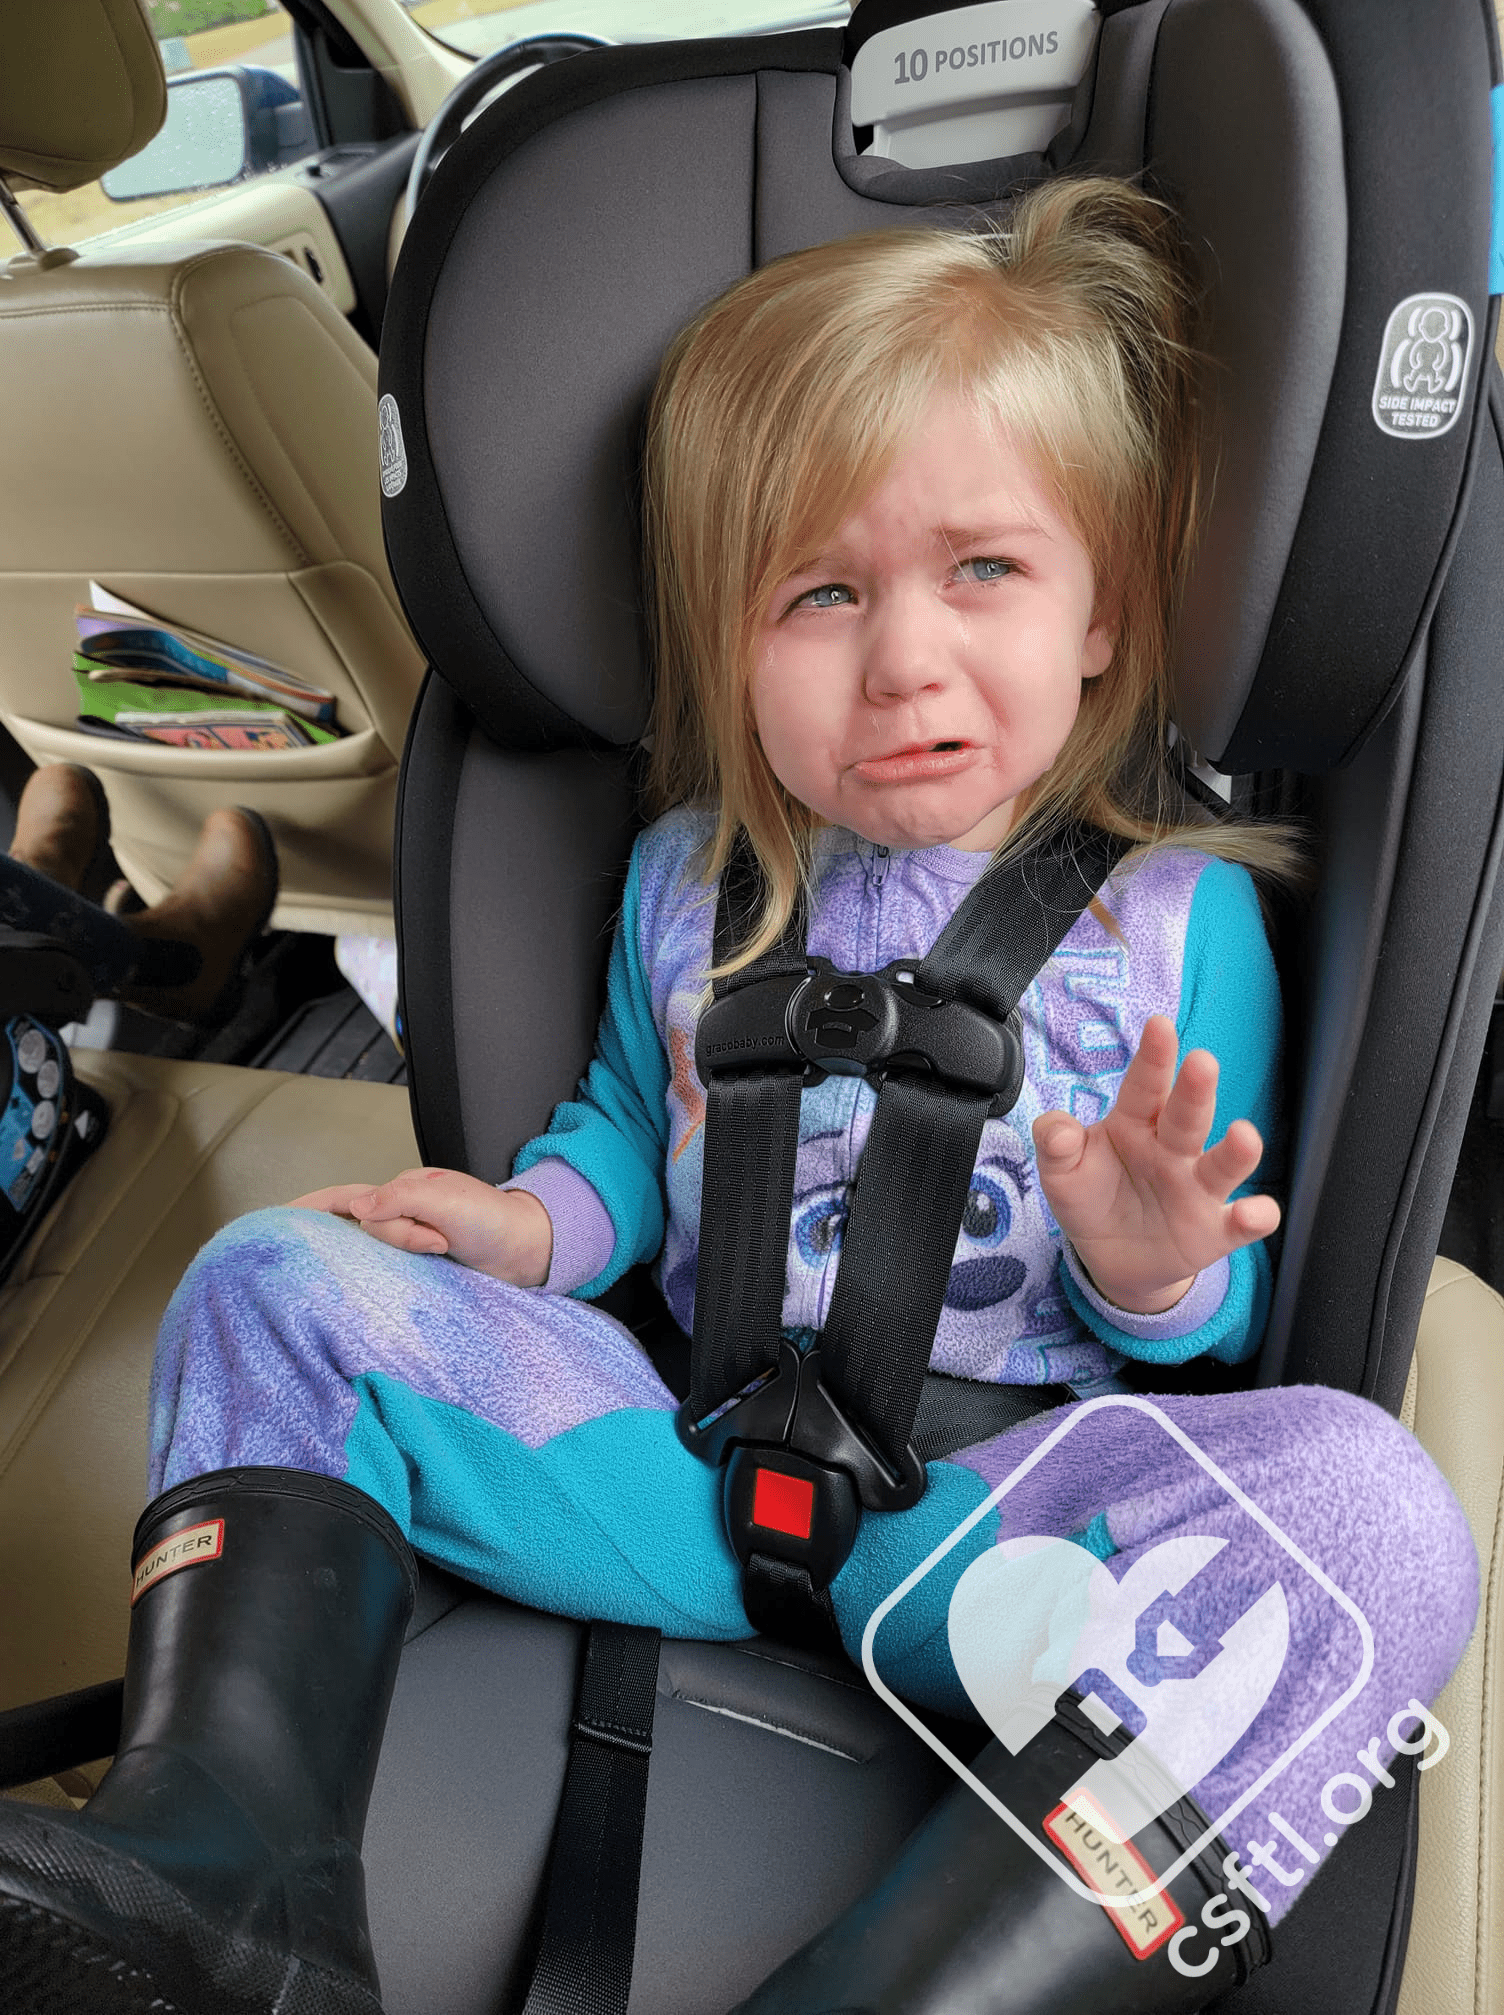 My Baby Cries in their Car Seat, What Can I Do?